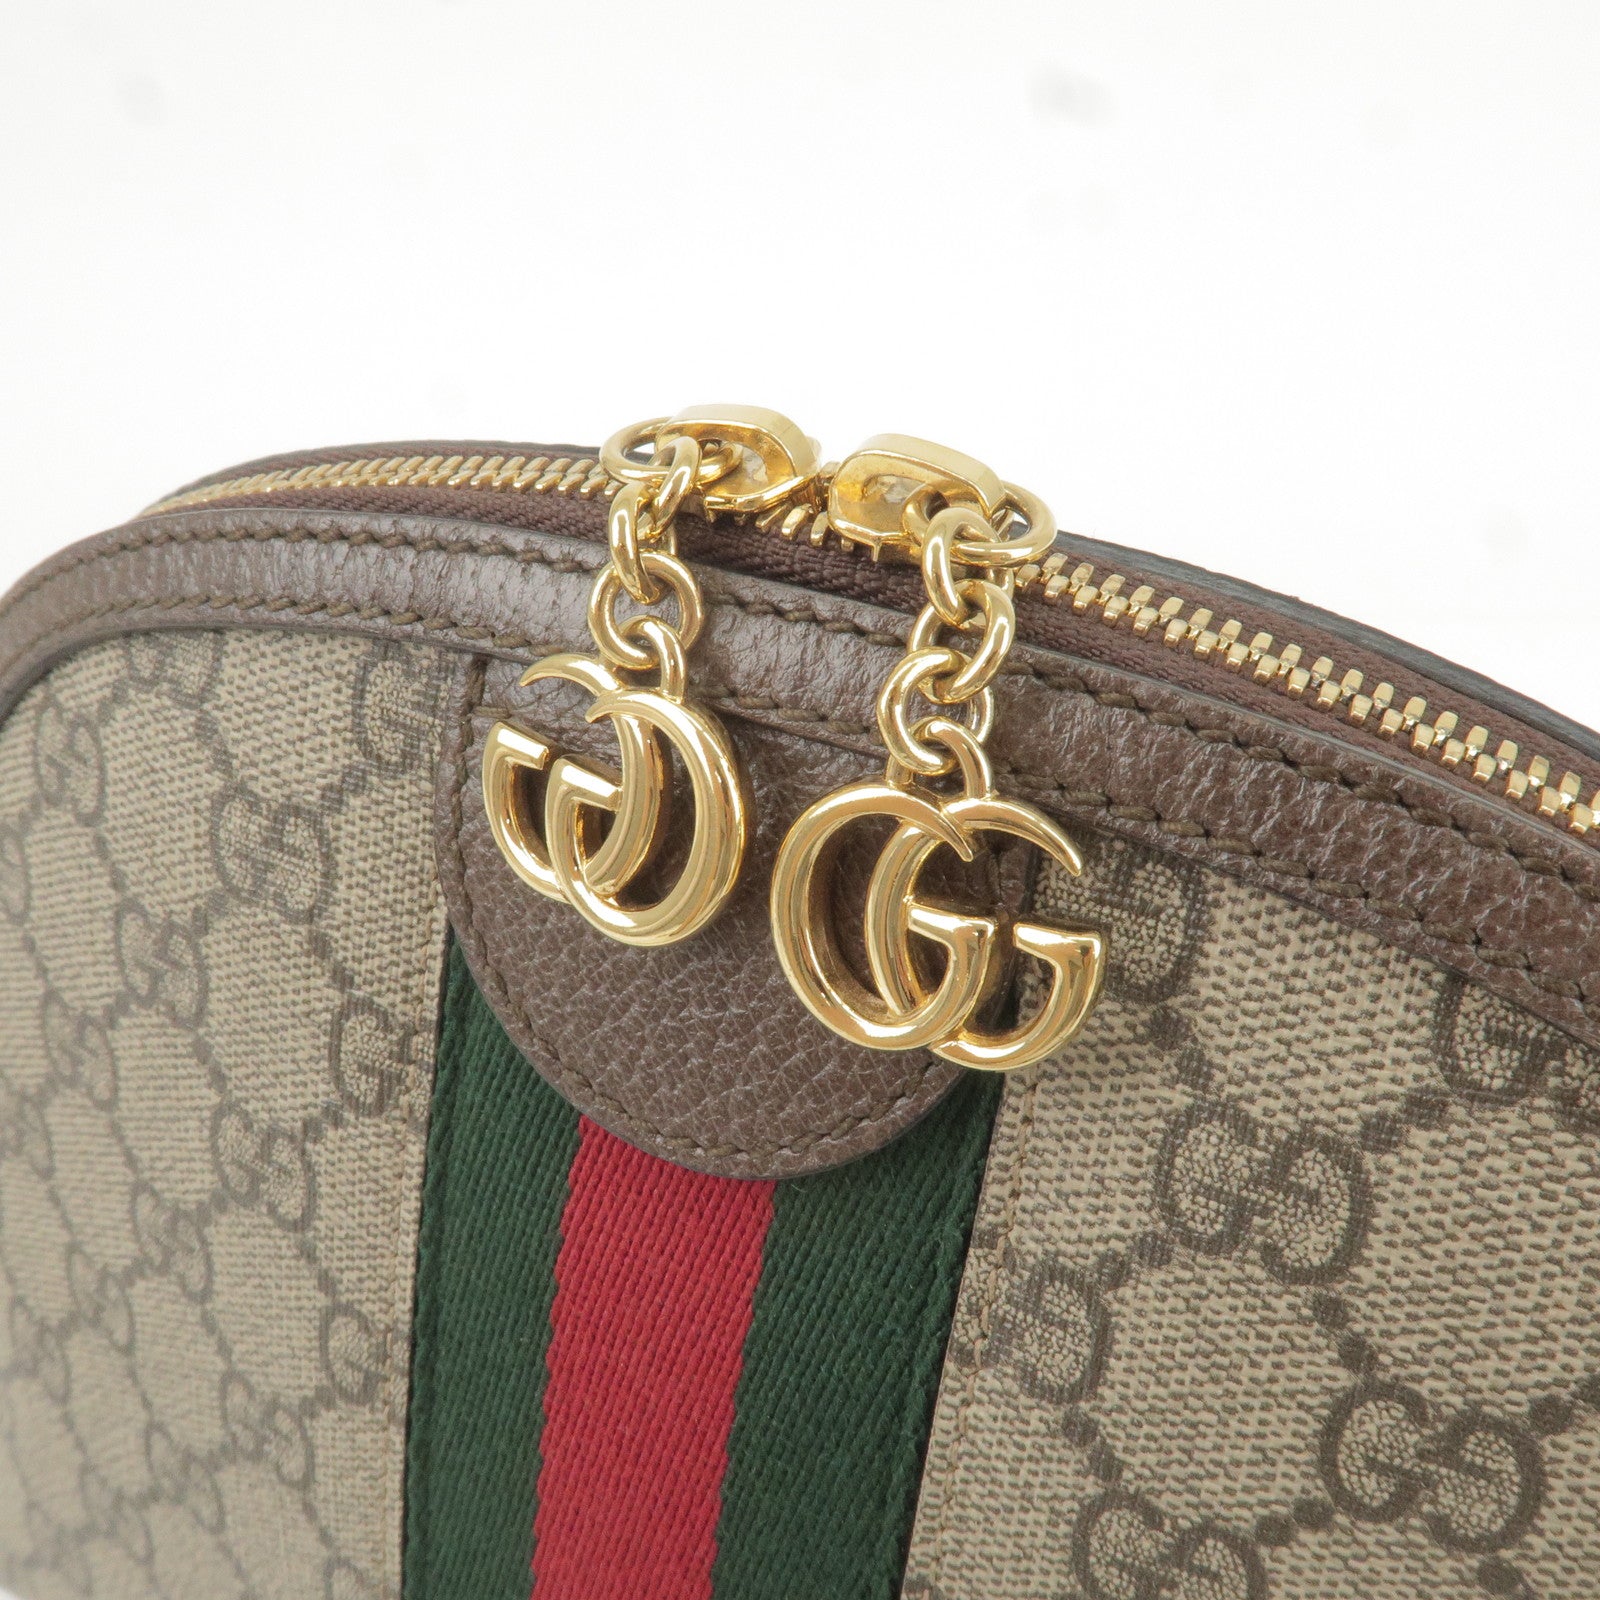 GUCCI Ophidia GG Small Suede Shoulder Bag Black 499621 - 10% Off